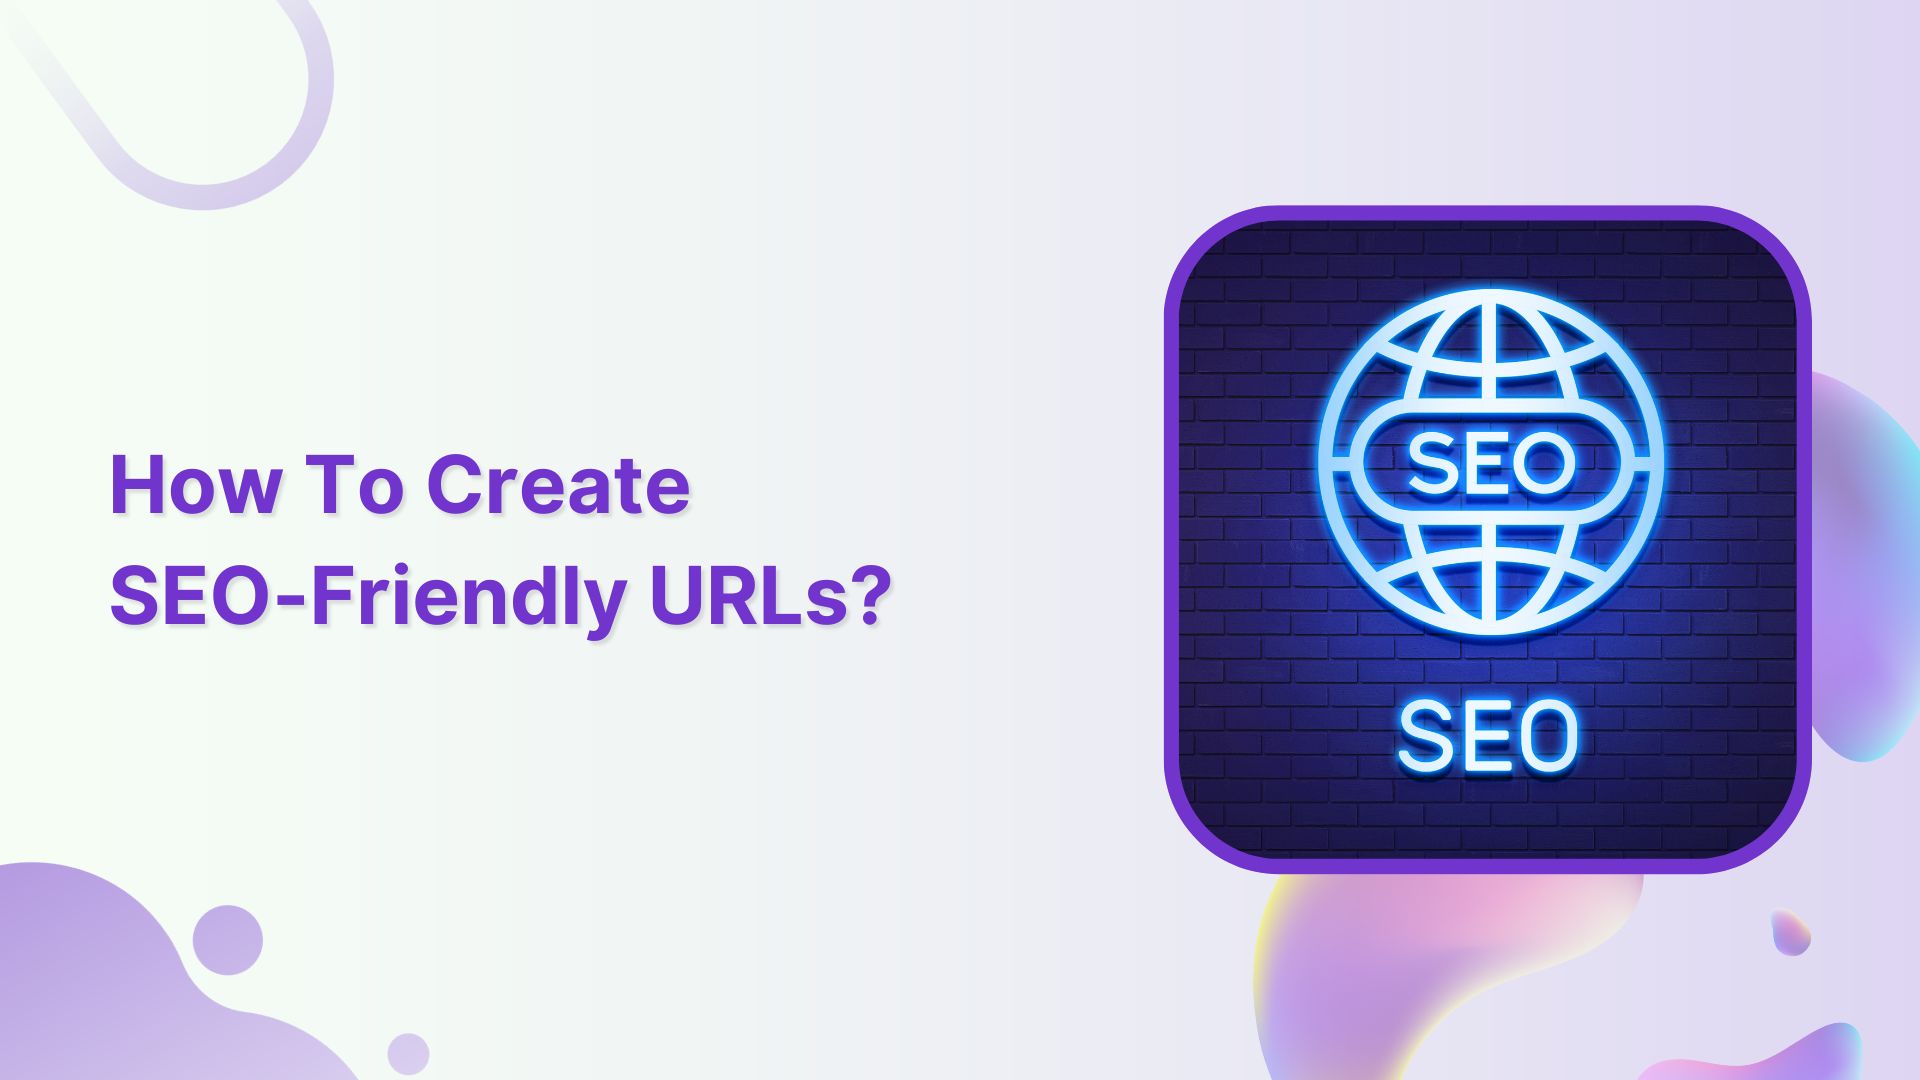 How To Create SEO-Friendly URLs: Tips and Best Practices